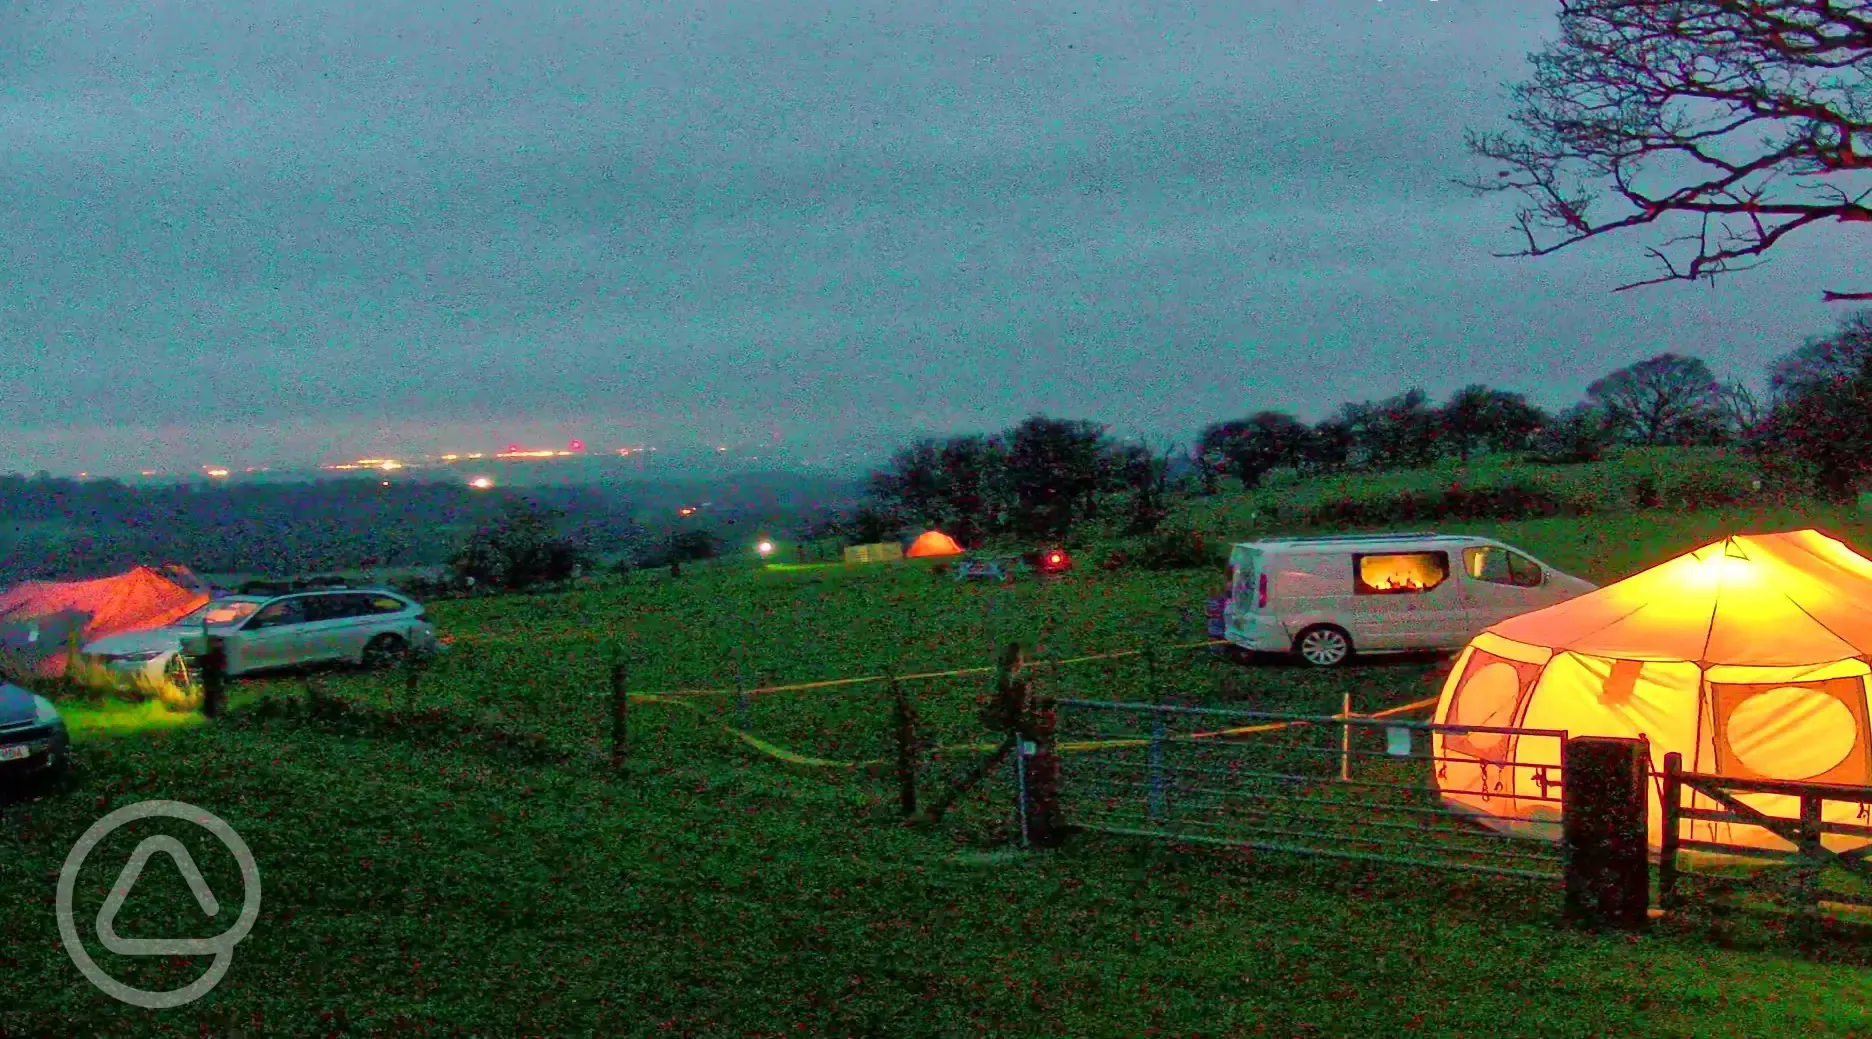 Campsite at dusk with distant lights of Shrewsbury